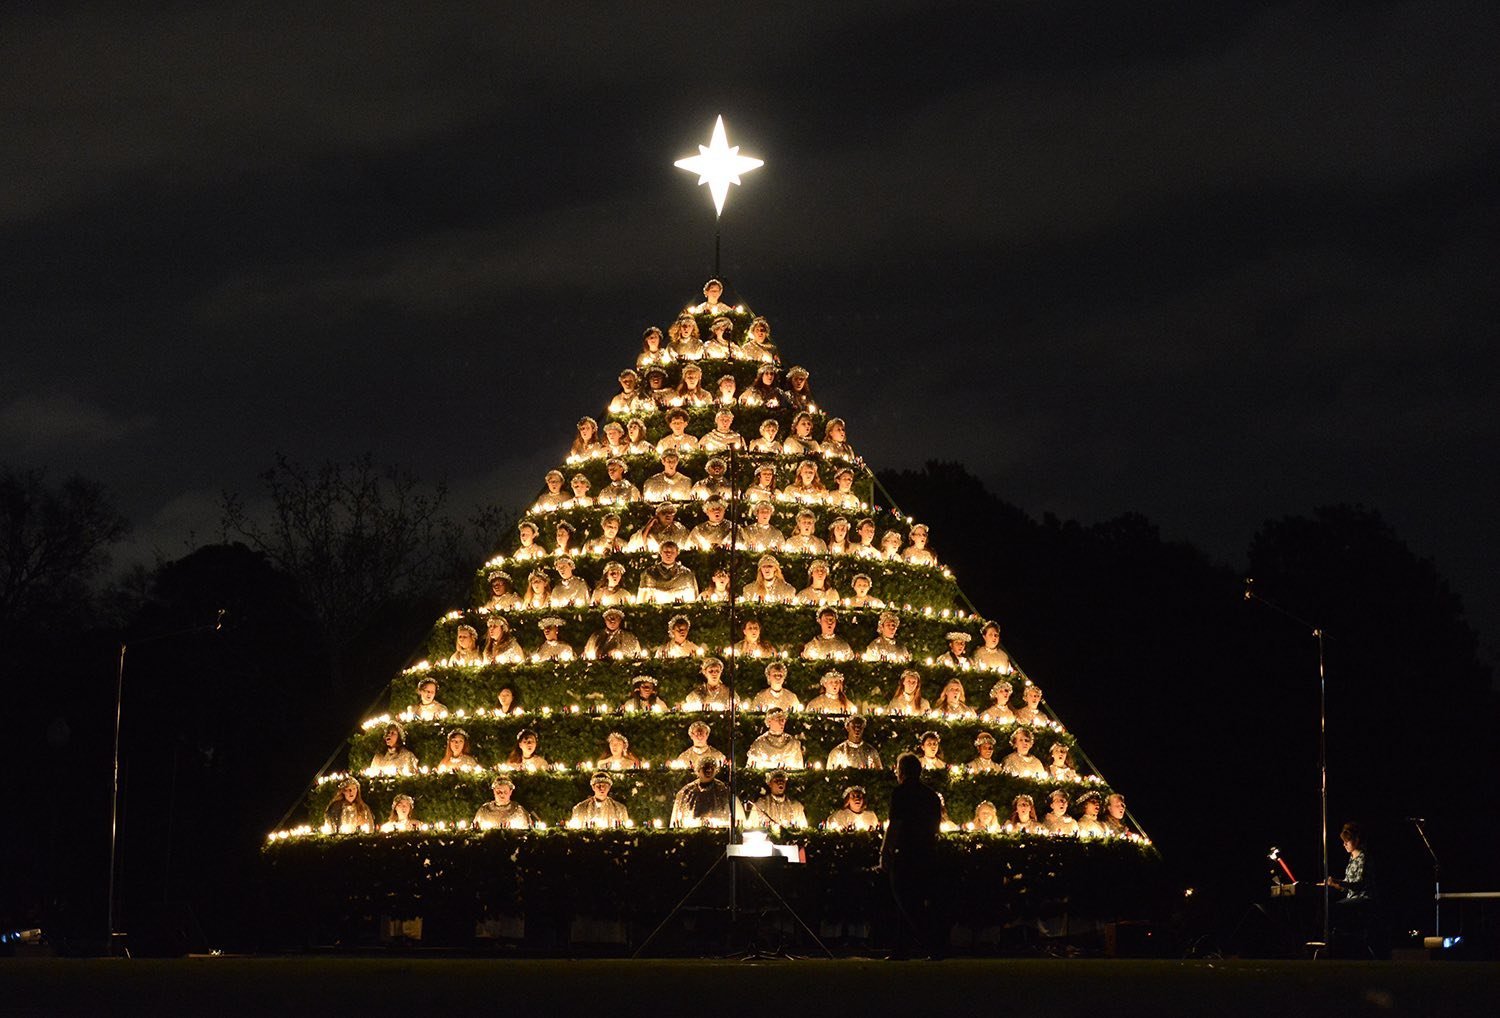 The Belhaven Singing Christmas Tree started in 1933, is considered to be the world's first and oldest outdoor singing Christmas tree tradition.